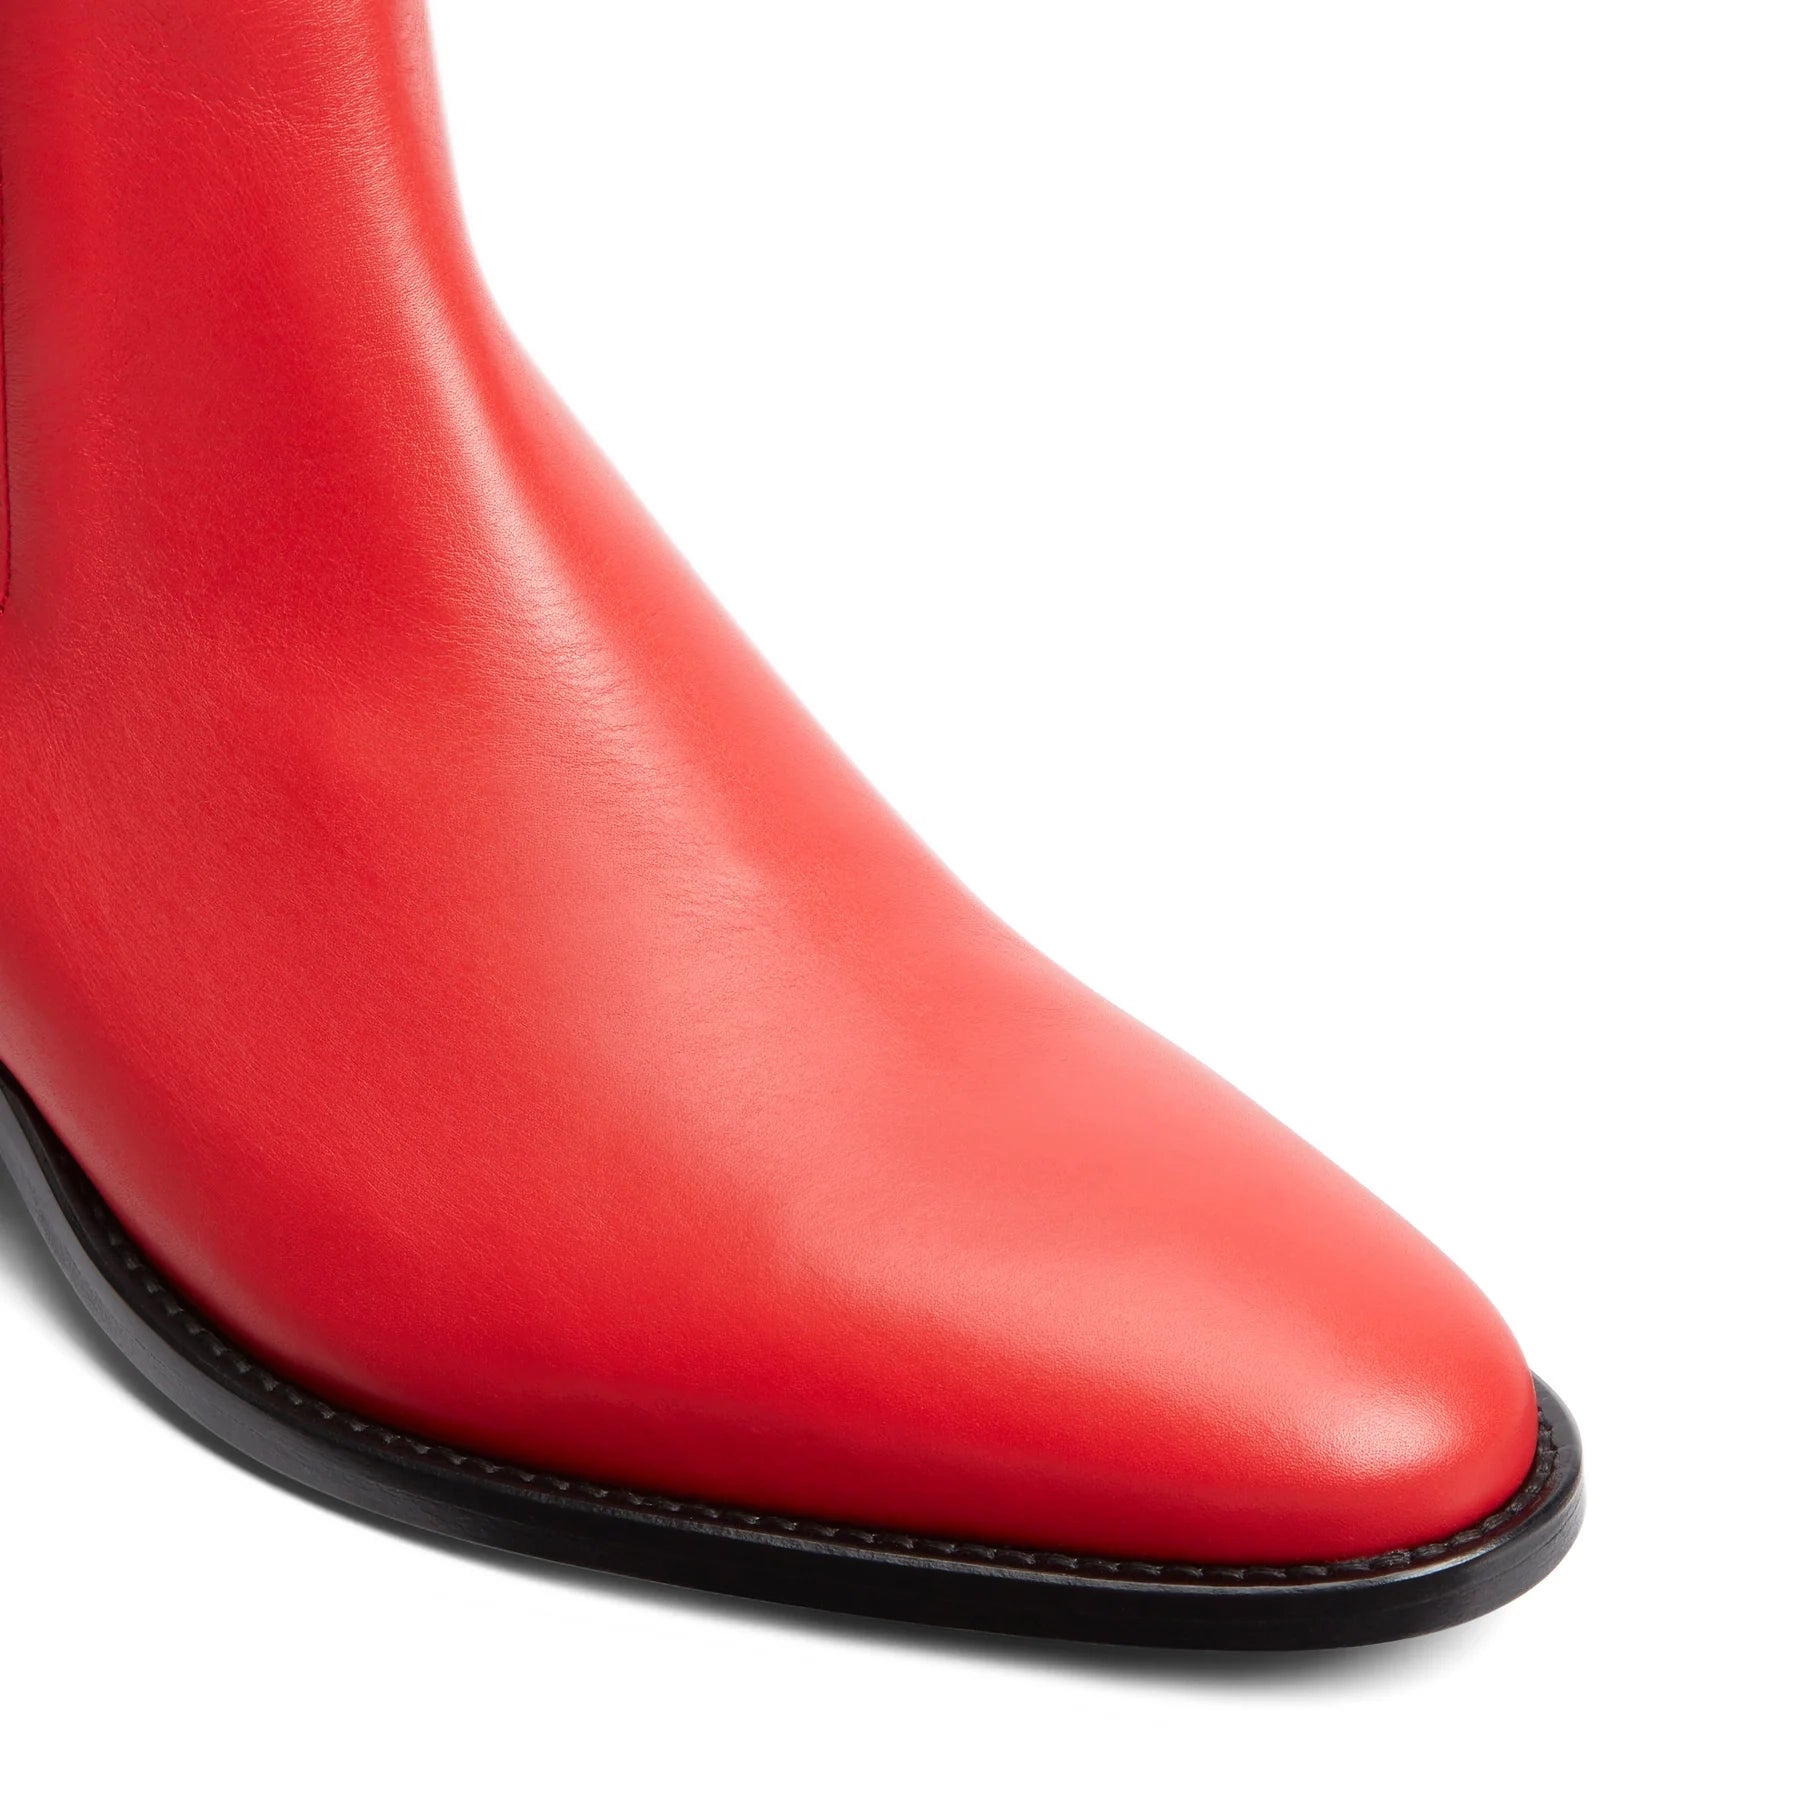 Chelsea Boot - Red Leather